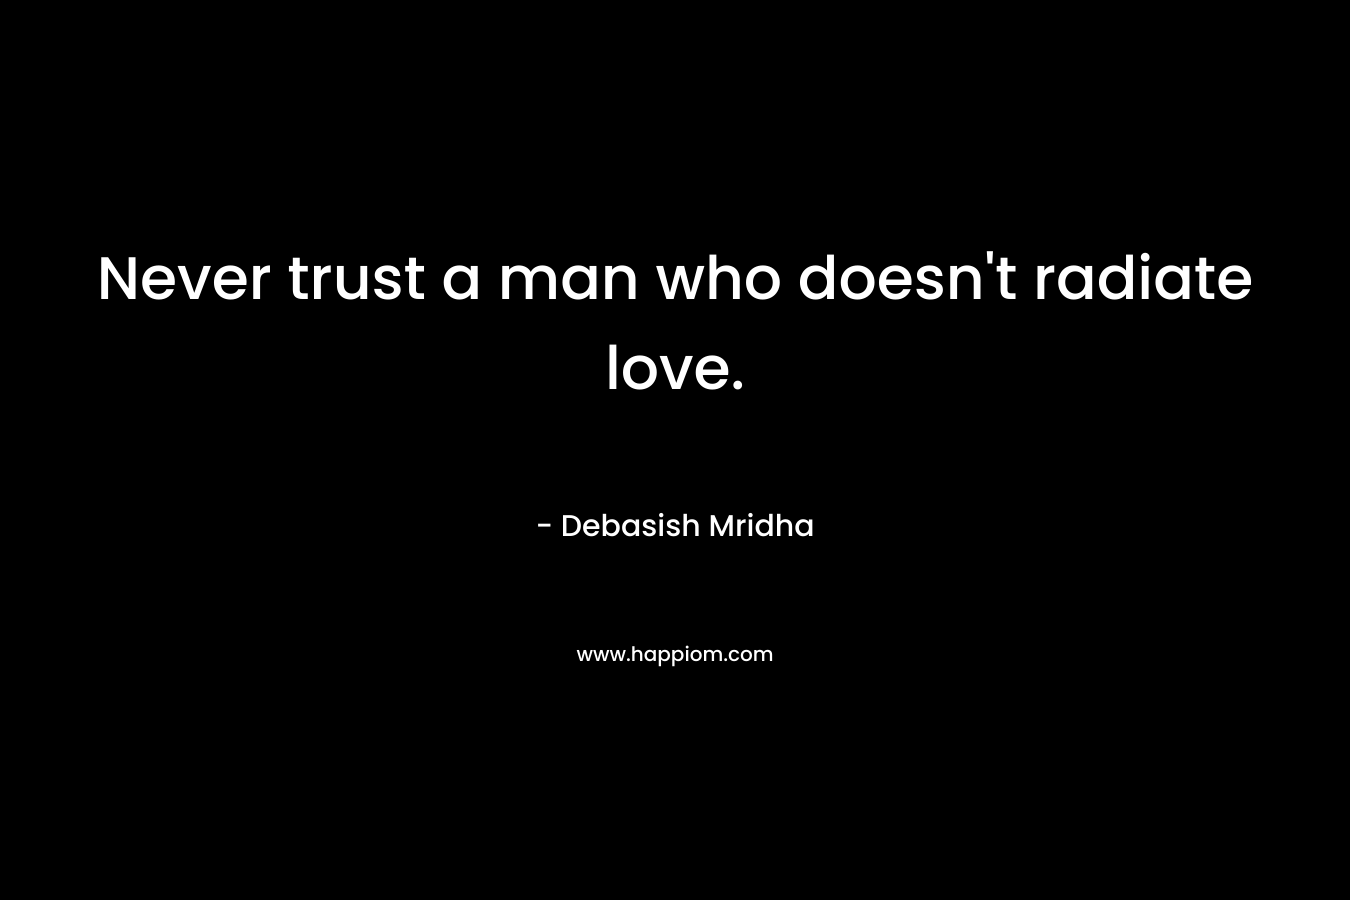 Never trust a man who doesn't radiate love.